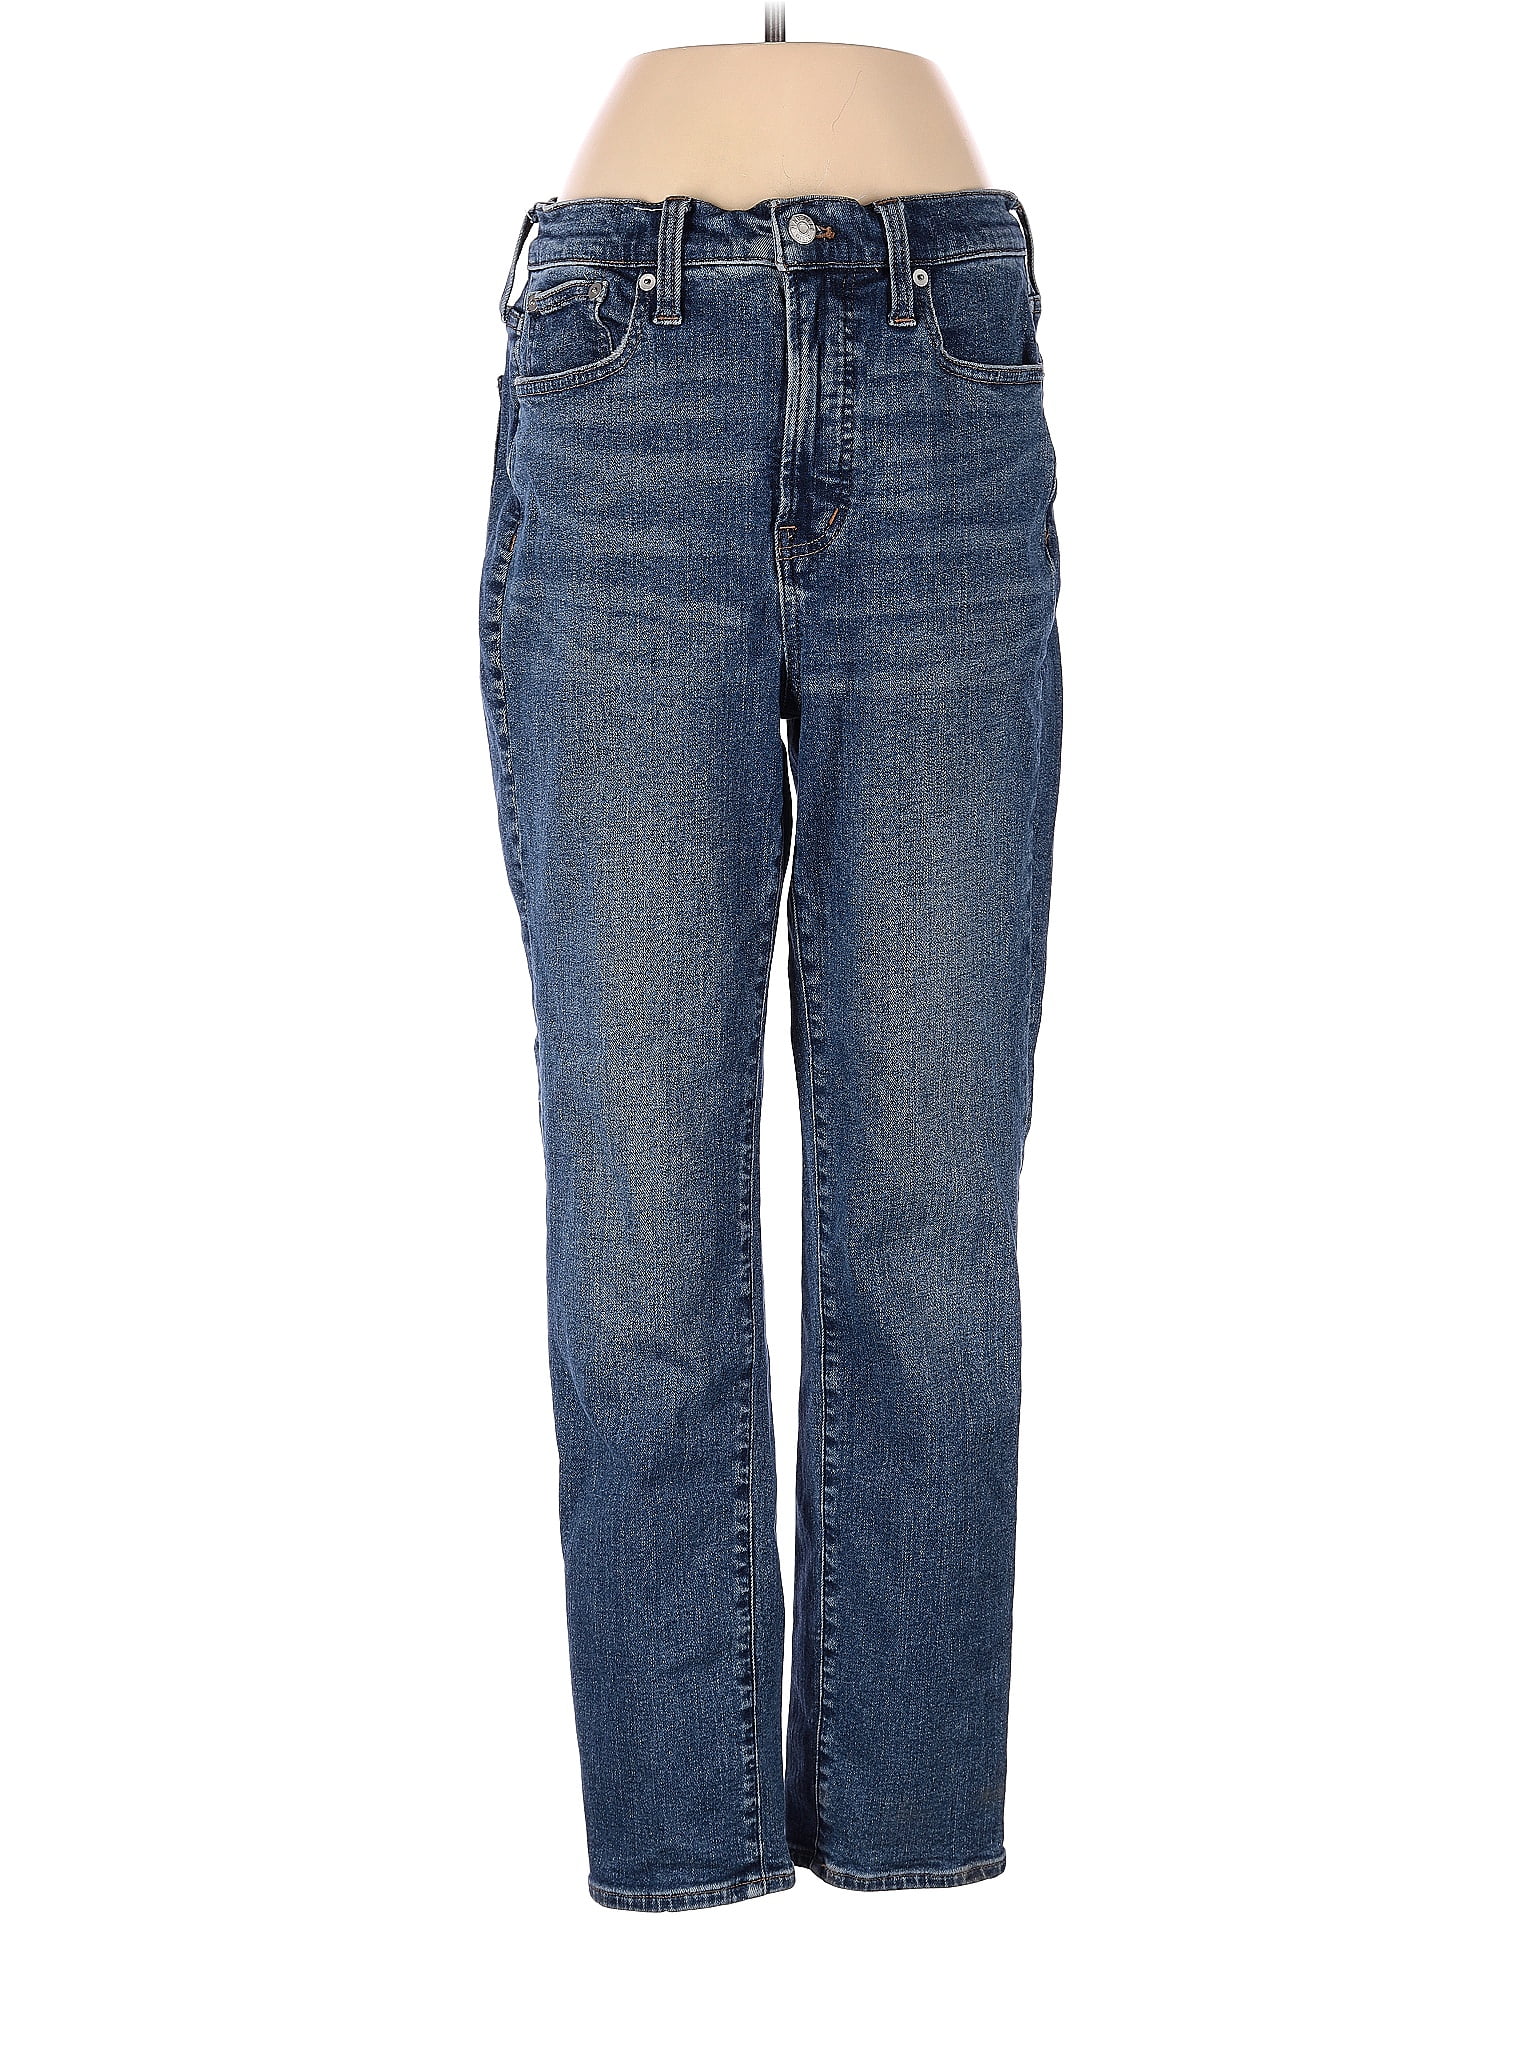 The Perfect Vintage Jean in Manorford Wash: Instacozy Edition